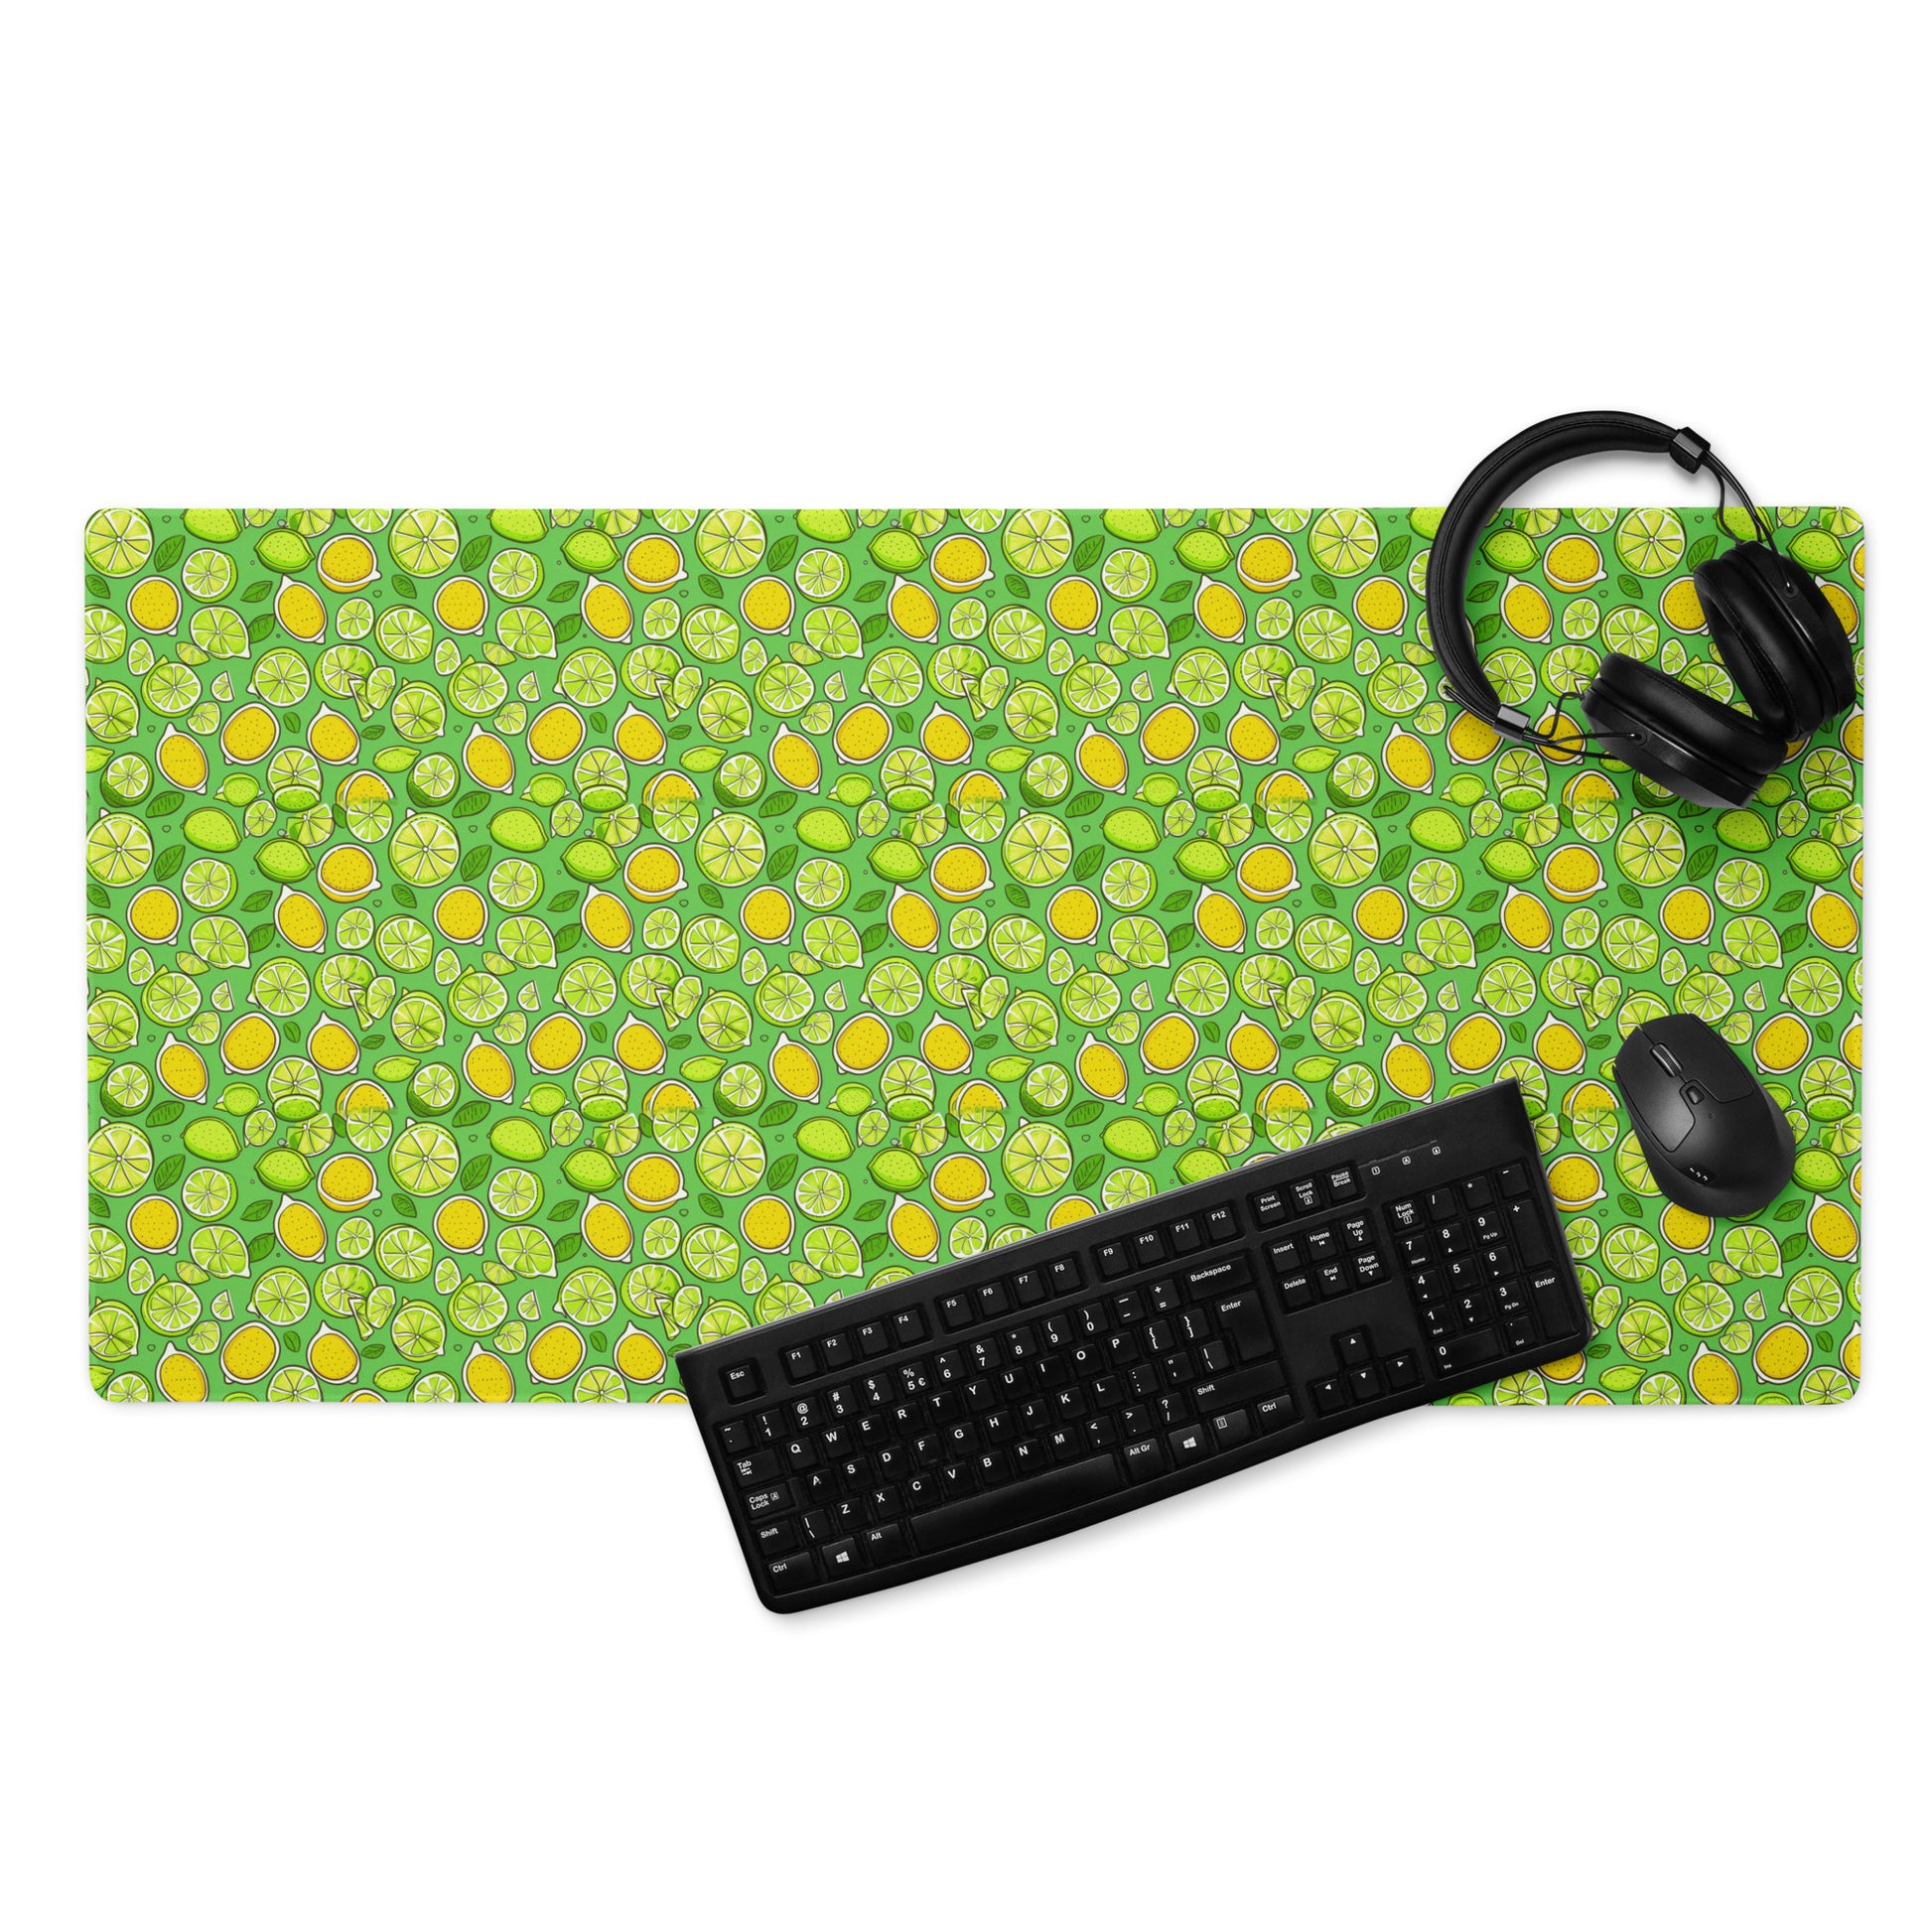 A 36" x 18" gaming desk pad with lemons and limes on a green background. A keyboard, mouse, and headphones sit on it.